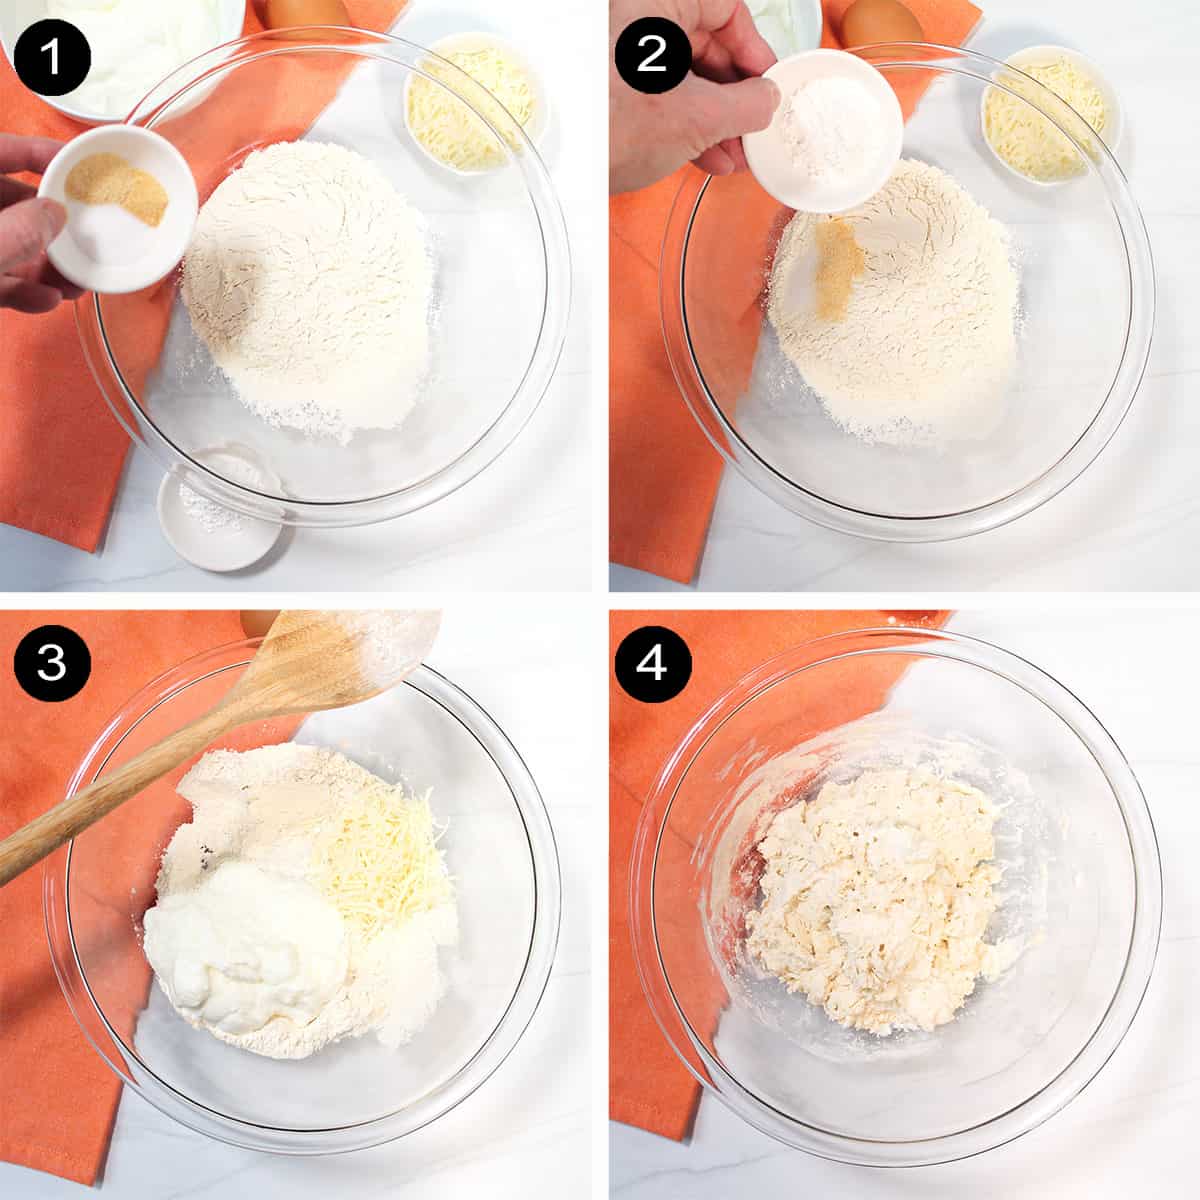 Collage of steps to make cheese bagel dough.